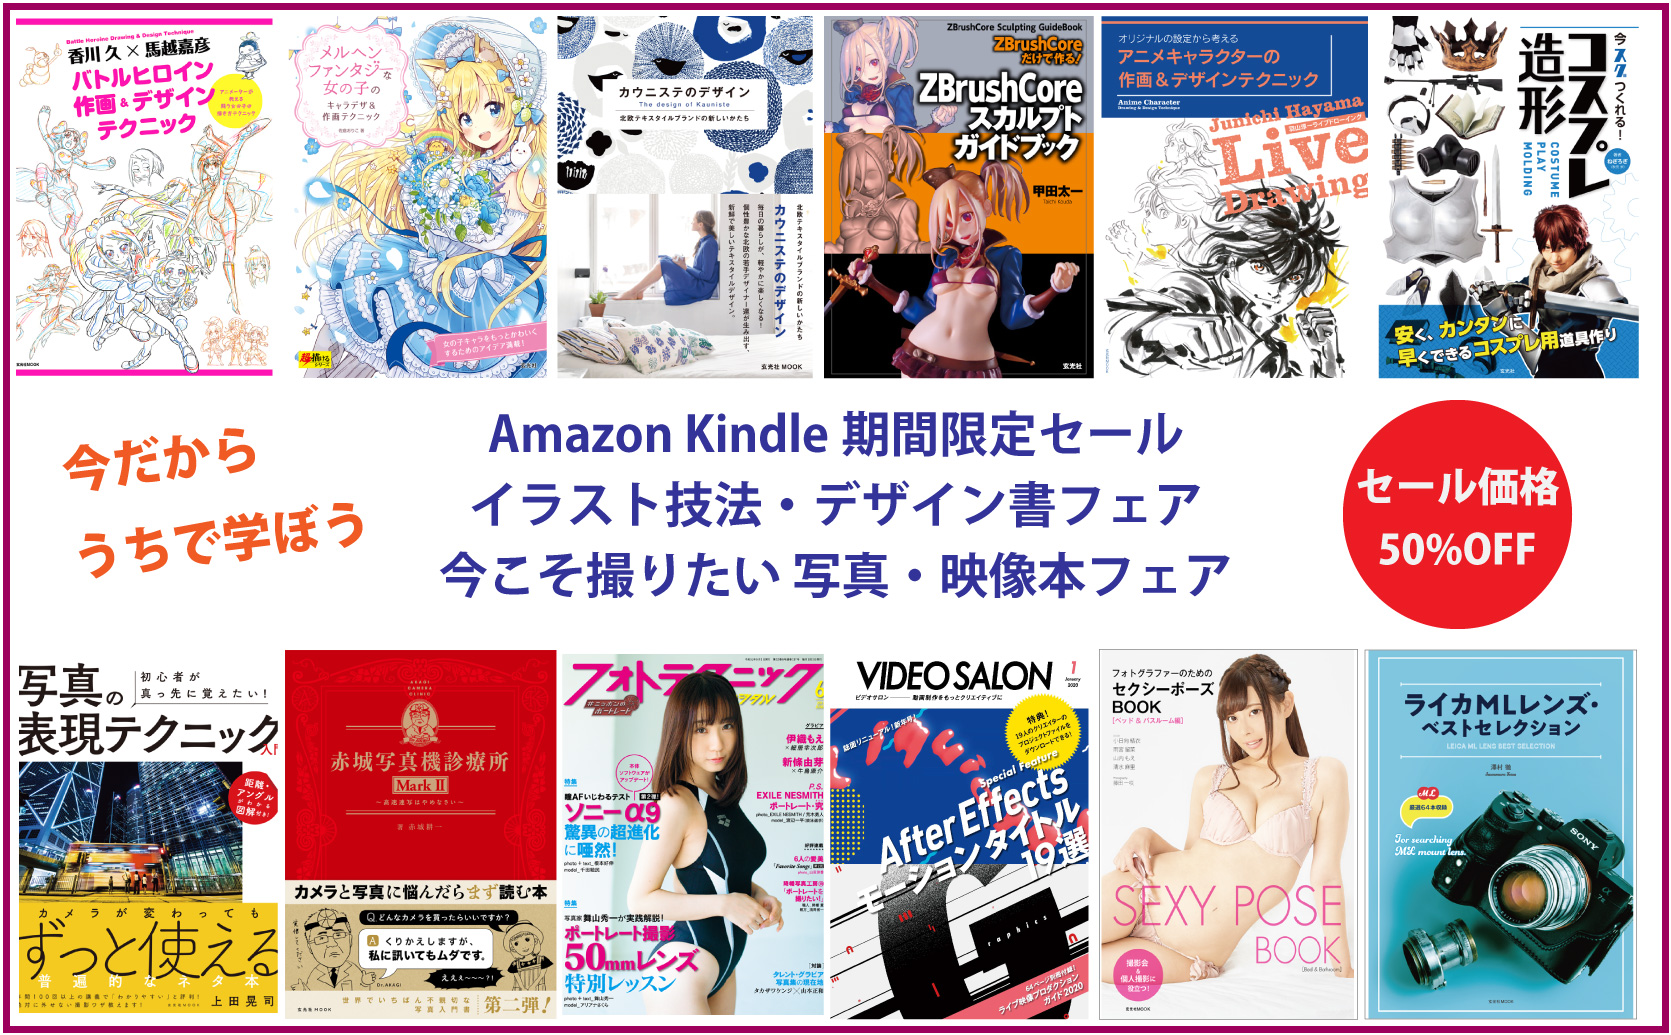 Amazon Kindle 50 Off 5月7日まで 在宅応援 イラスト技法 デザイン書フェア 今こそ撮りたい 写真 映像本フェア Pictures